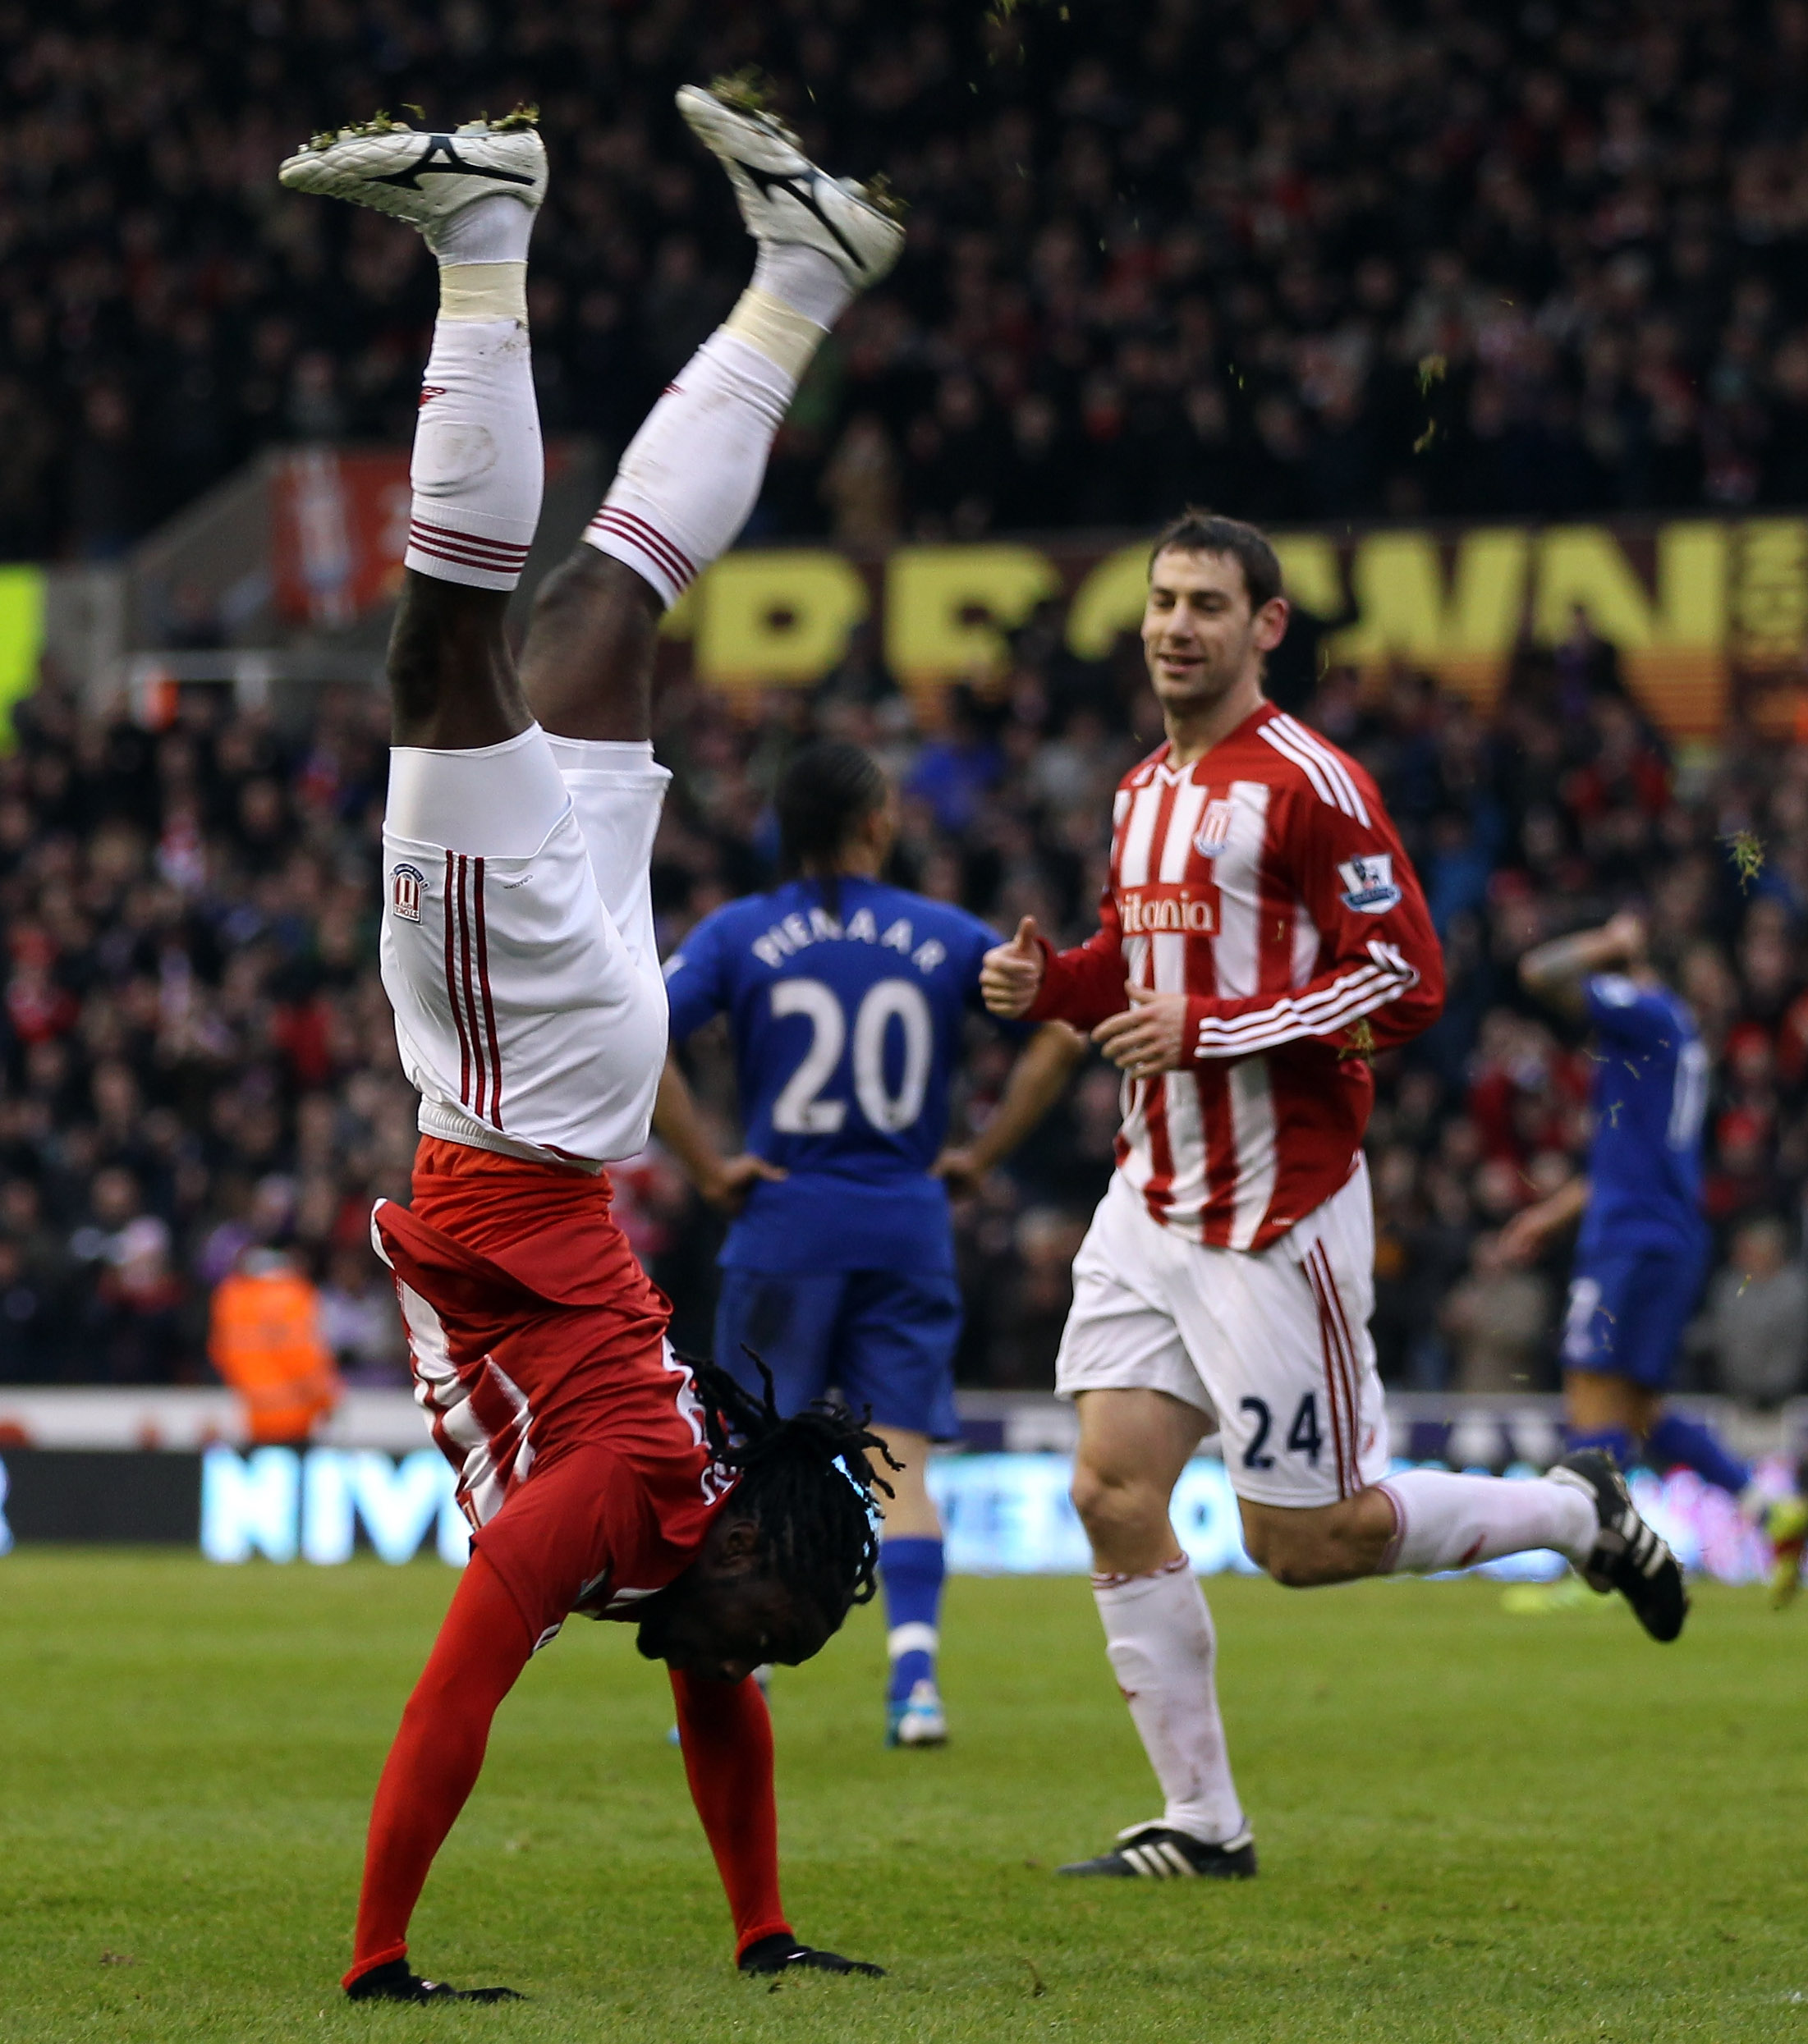 STOKE ON TRENT, ENGLAND - JANUARY 01:  Kenwyne Jones of Stoke celebrates after the opening goal during the Barclays Premier League match between Stoke City and Everton at the Britannia Stadium on January 1, 2011 in Stoke on Trent, England.  (Photo by Ross